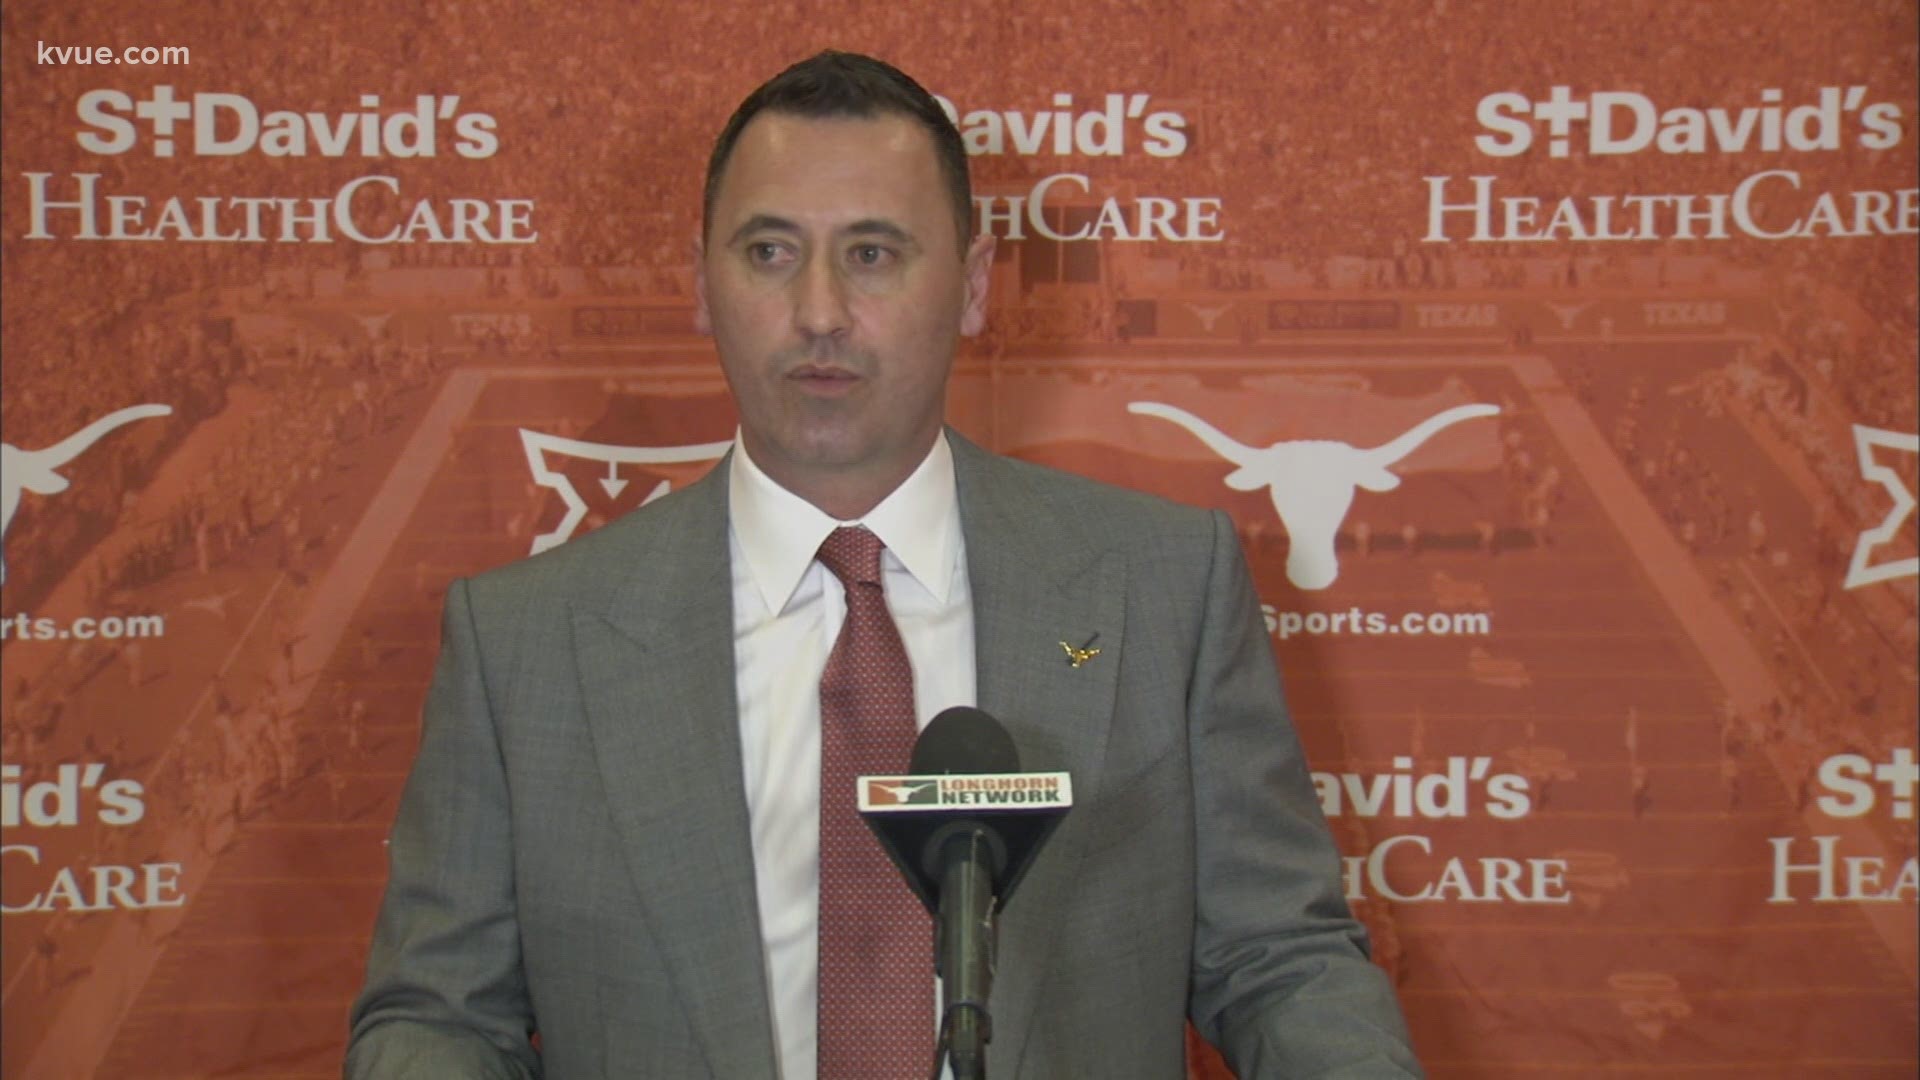 Steve Sarkisian's Obsession: Leading the Texas Longhorns to Championship Glory